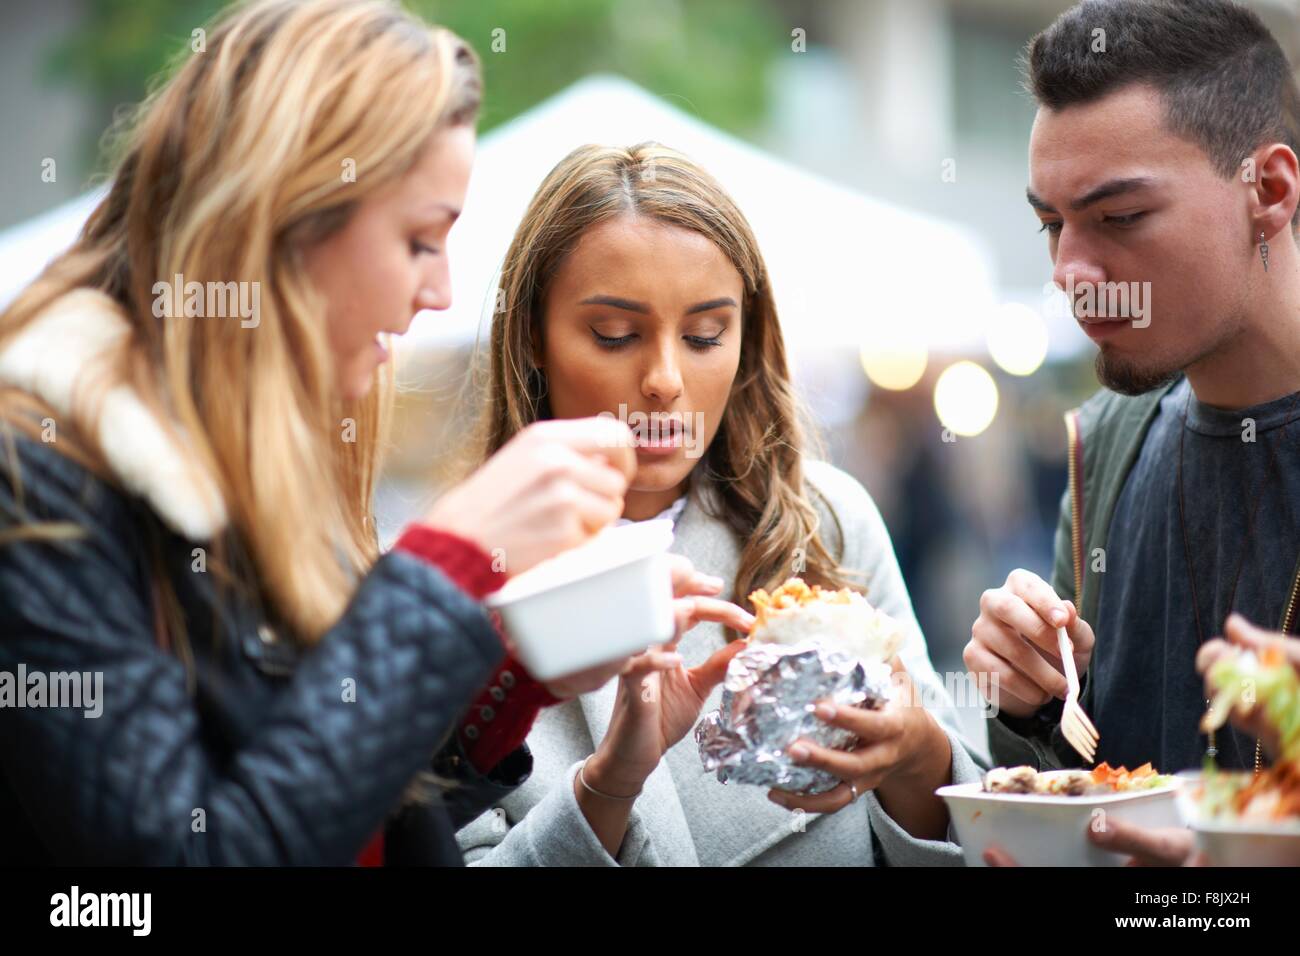 Group of young adults eating takeaway food, outdoors Stock Photo